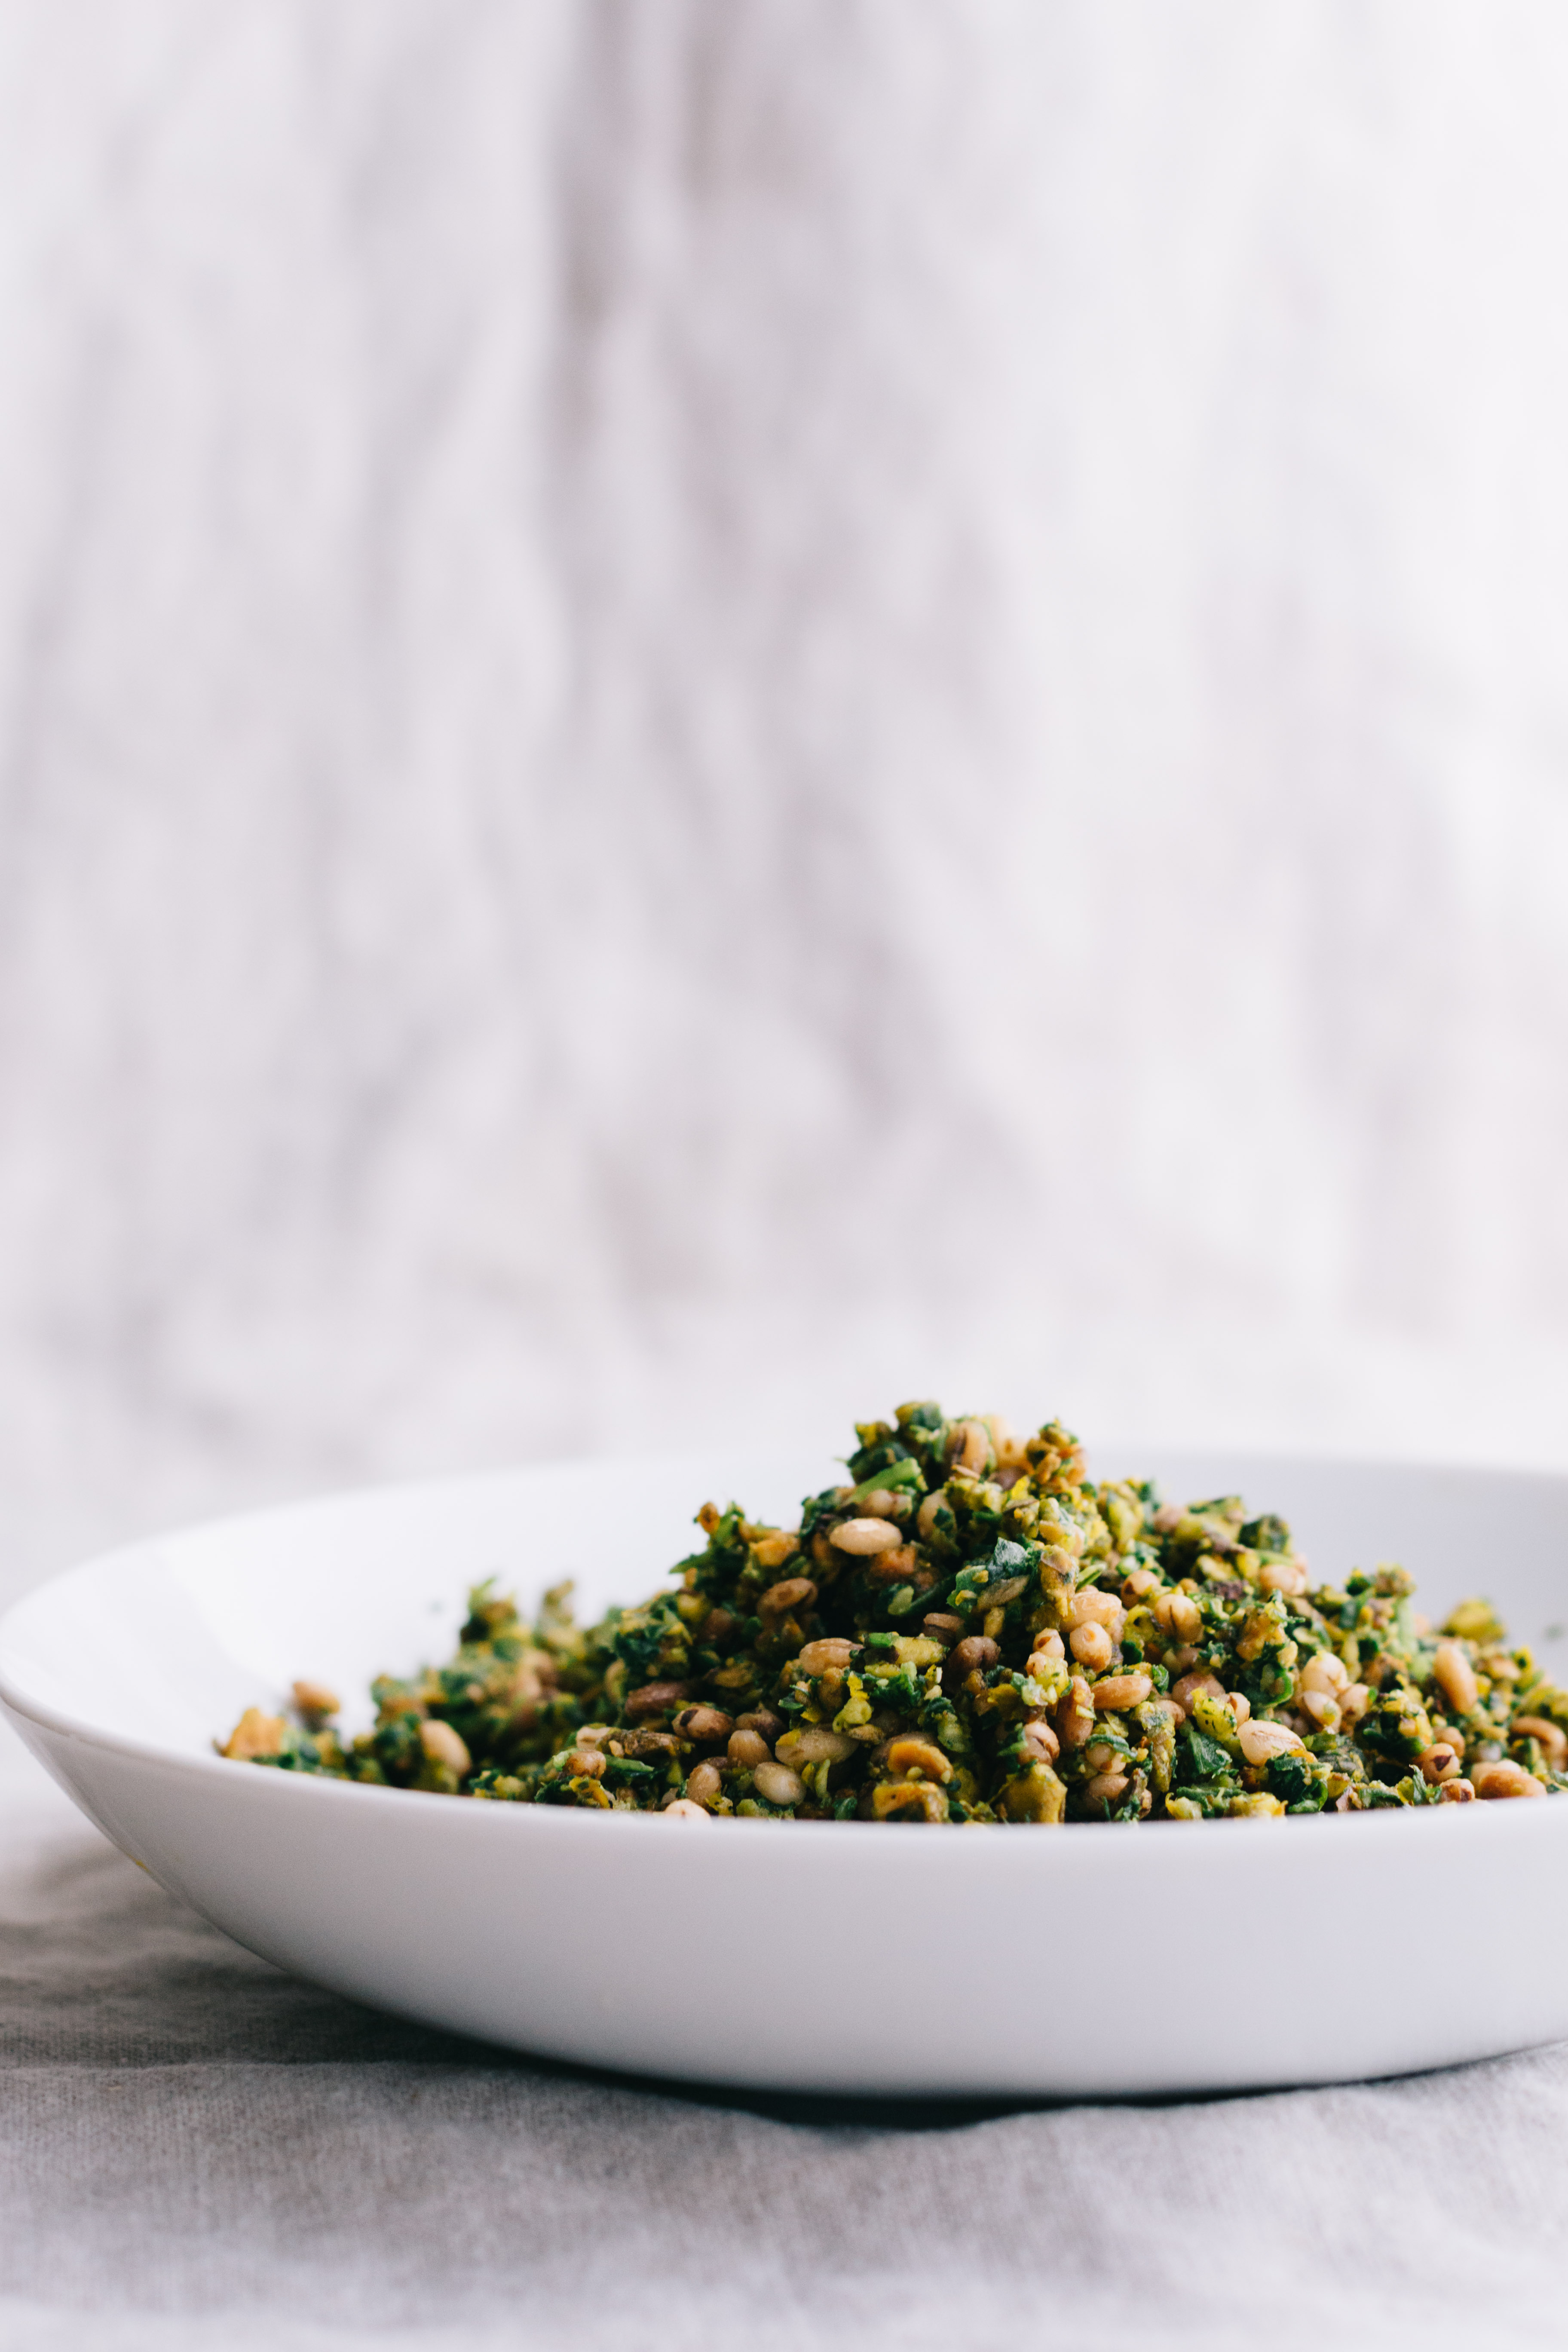 Vertical shot of pistachio gremolata with barley piled high in a shallow bowl on a cloth surface.